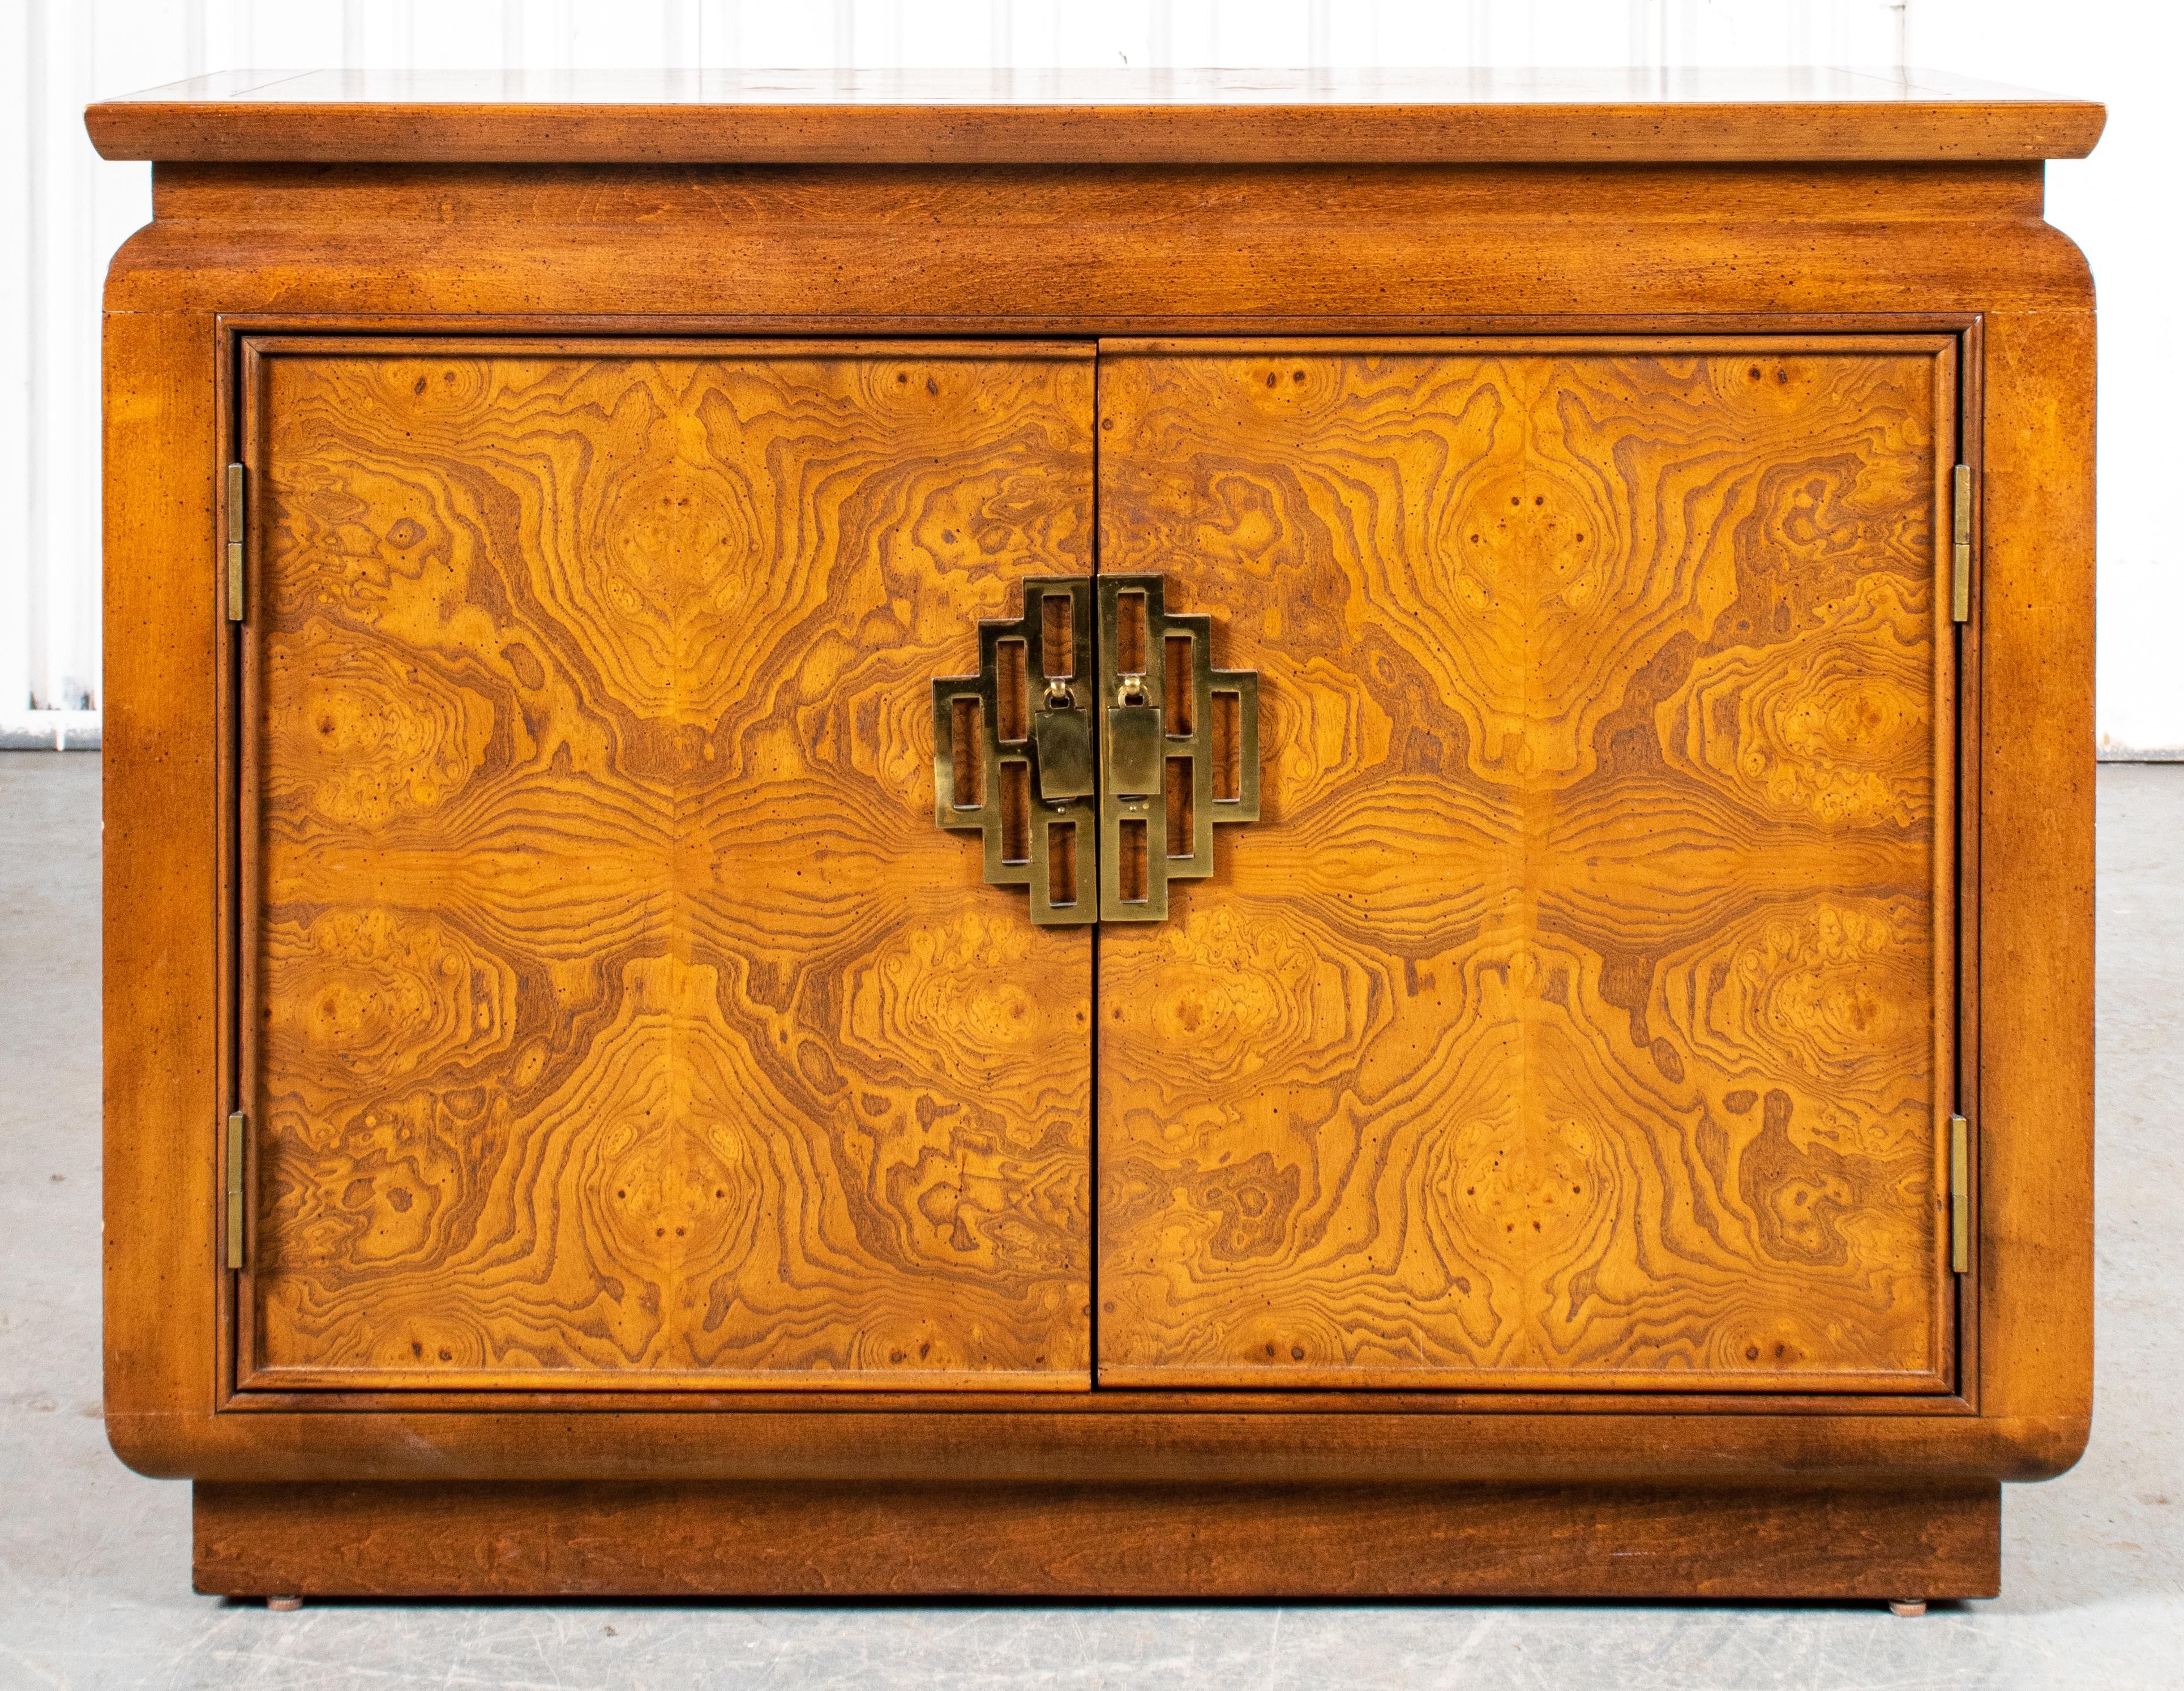 Asian Modern cabinet with wood veneer and brass embellishments in the Art Deco taste of James Mont. 
Measures: 31